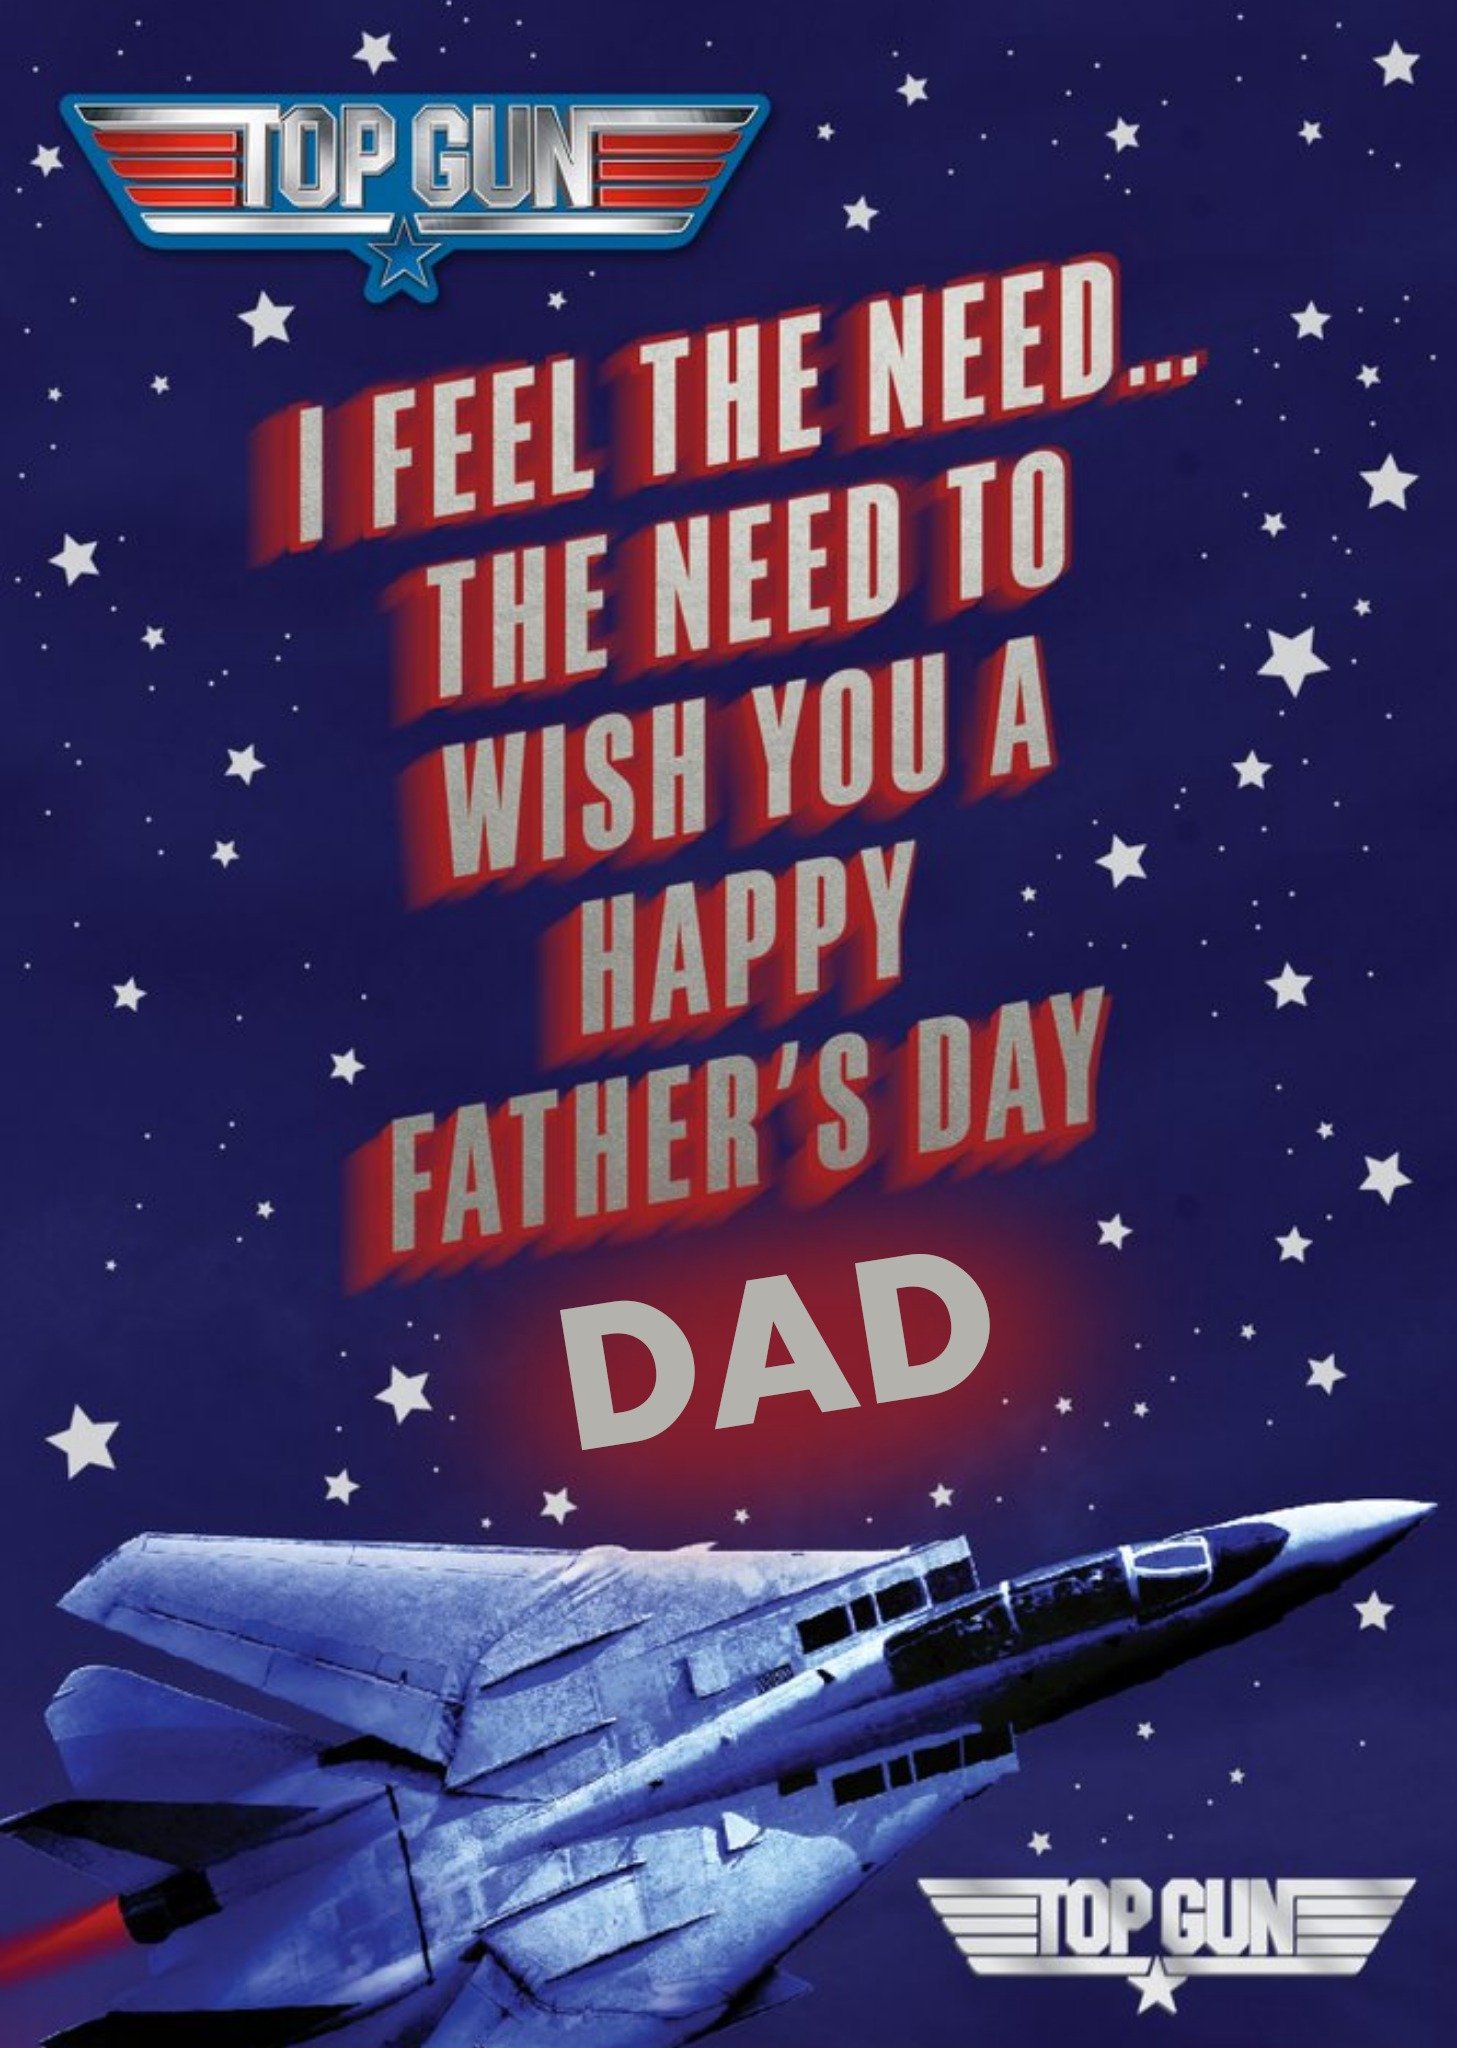 Other Top Gun I Feel The Need To Wish You A Happy Father's Day Card Ecard